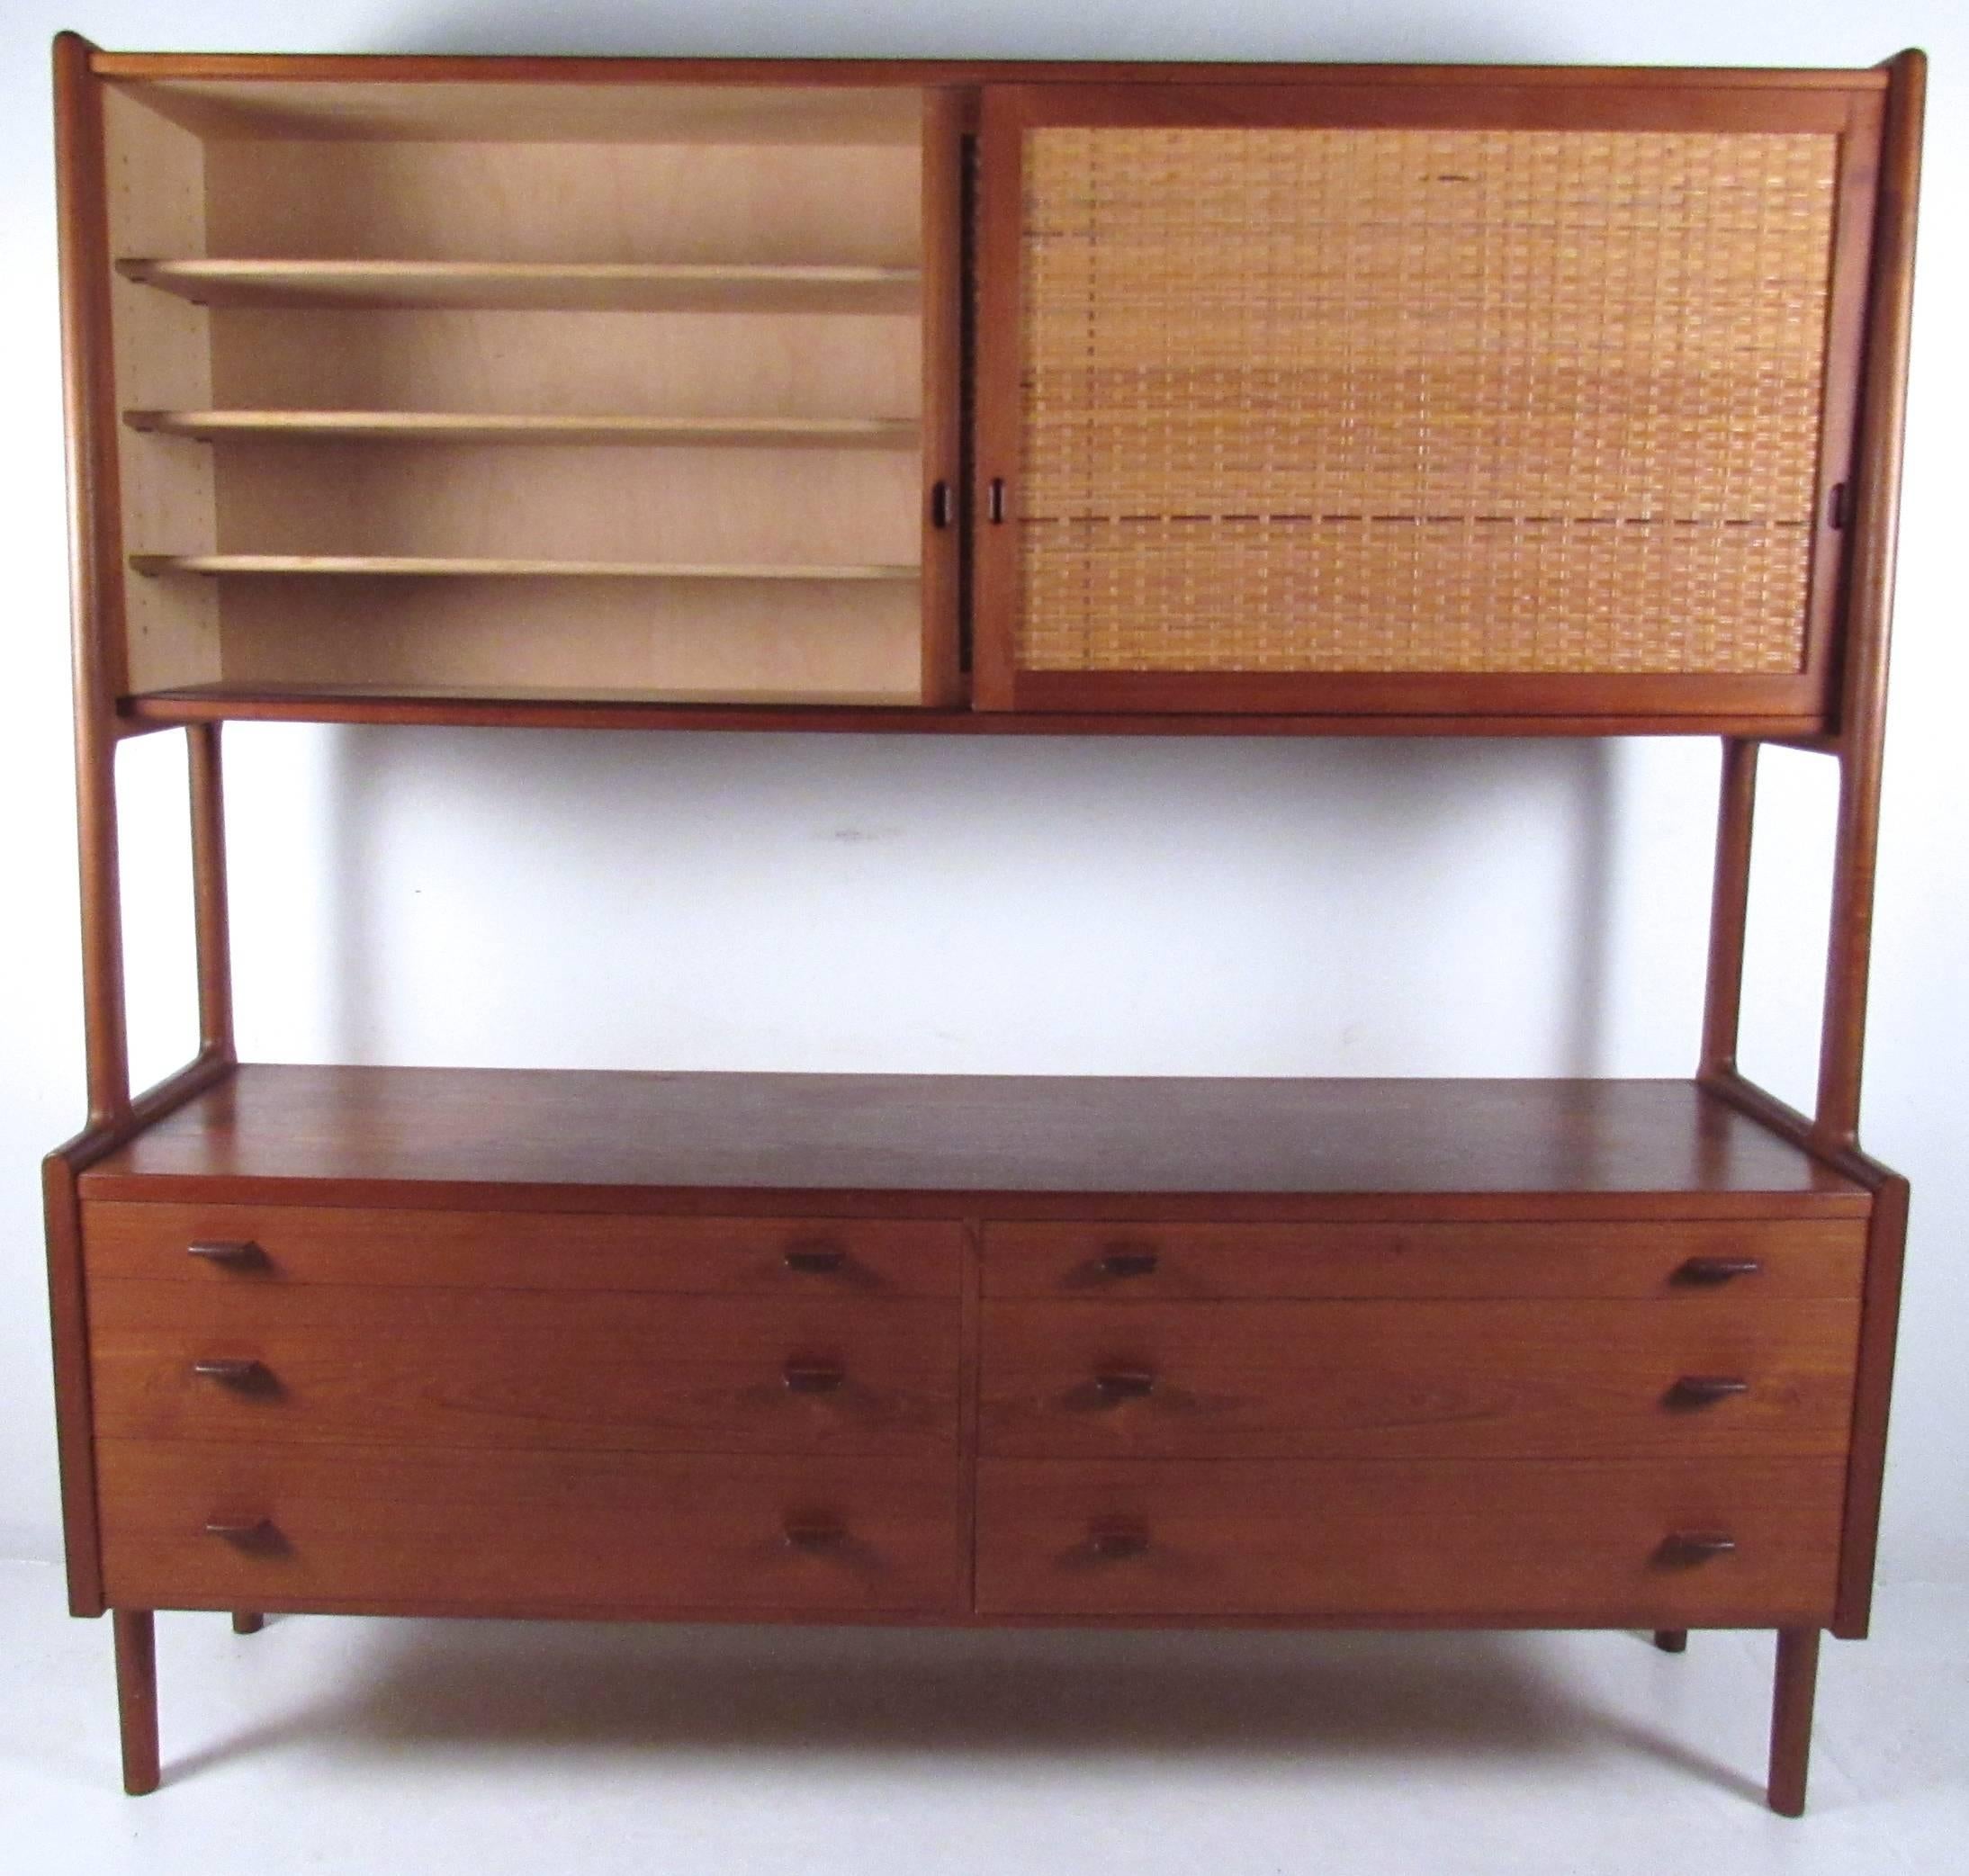 This beautiful Mid-Century sideboard features the unique two-tier design of Hans Wegner, combining quality teak construction with spacious storage options for any setting. Adjustable shelves, unique vintage finish and cane front sliding door